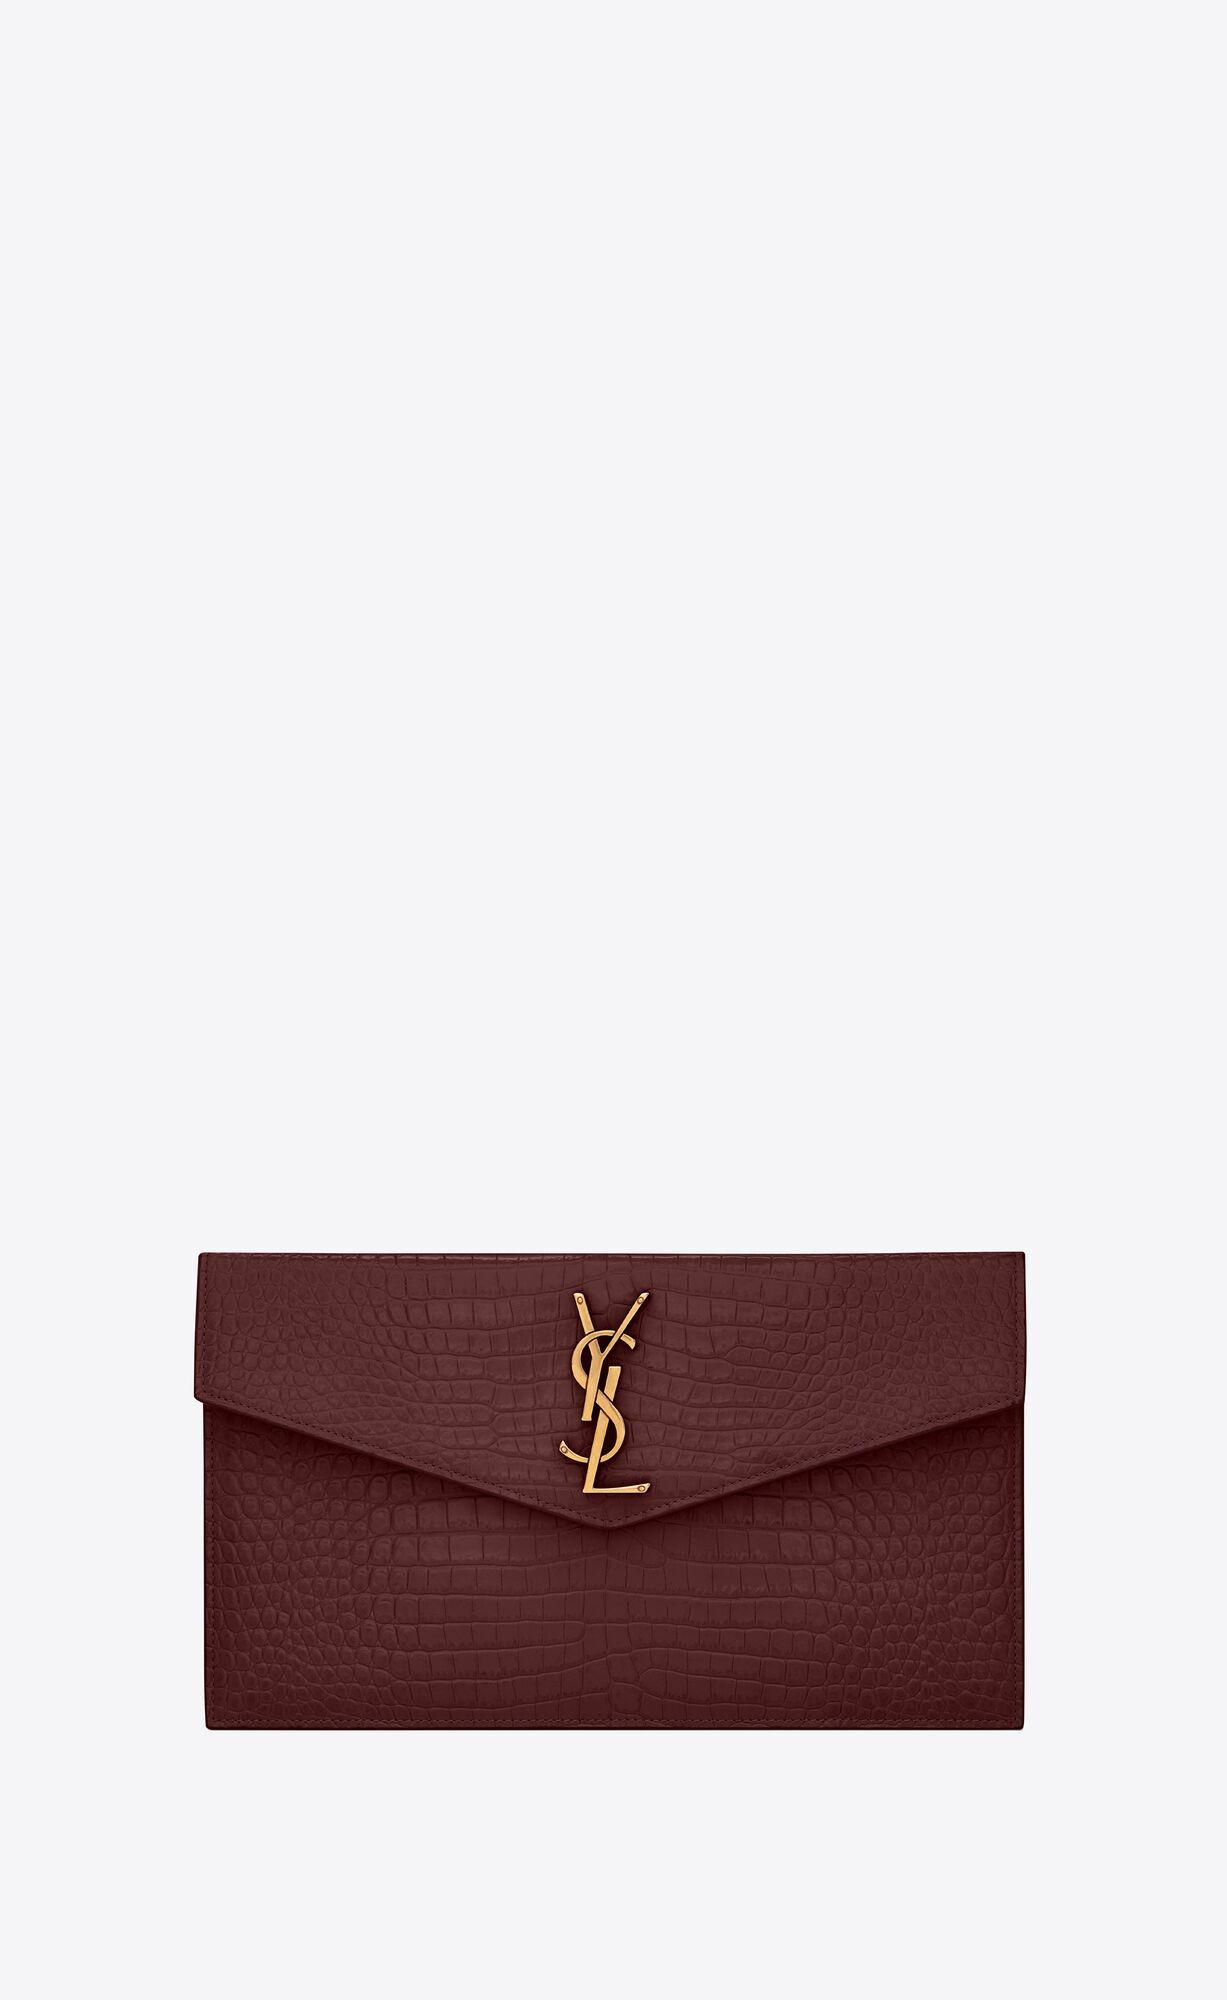 UPTOWN pouch in crocodile embossed shiny leather | Saint Laurent __locale_country__ | YSL.com | Saint Laurent Inc. (Global)